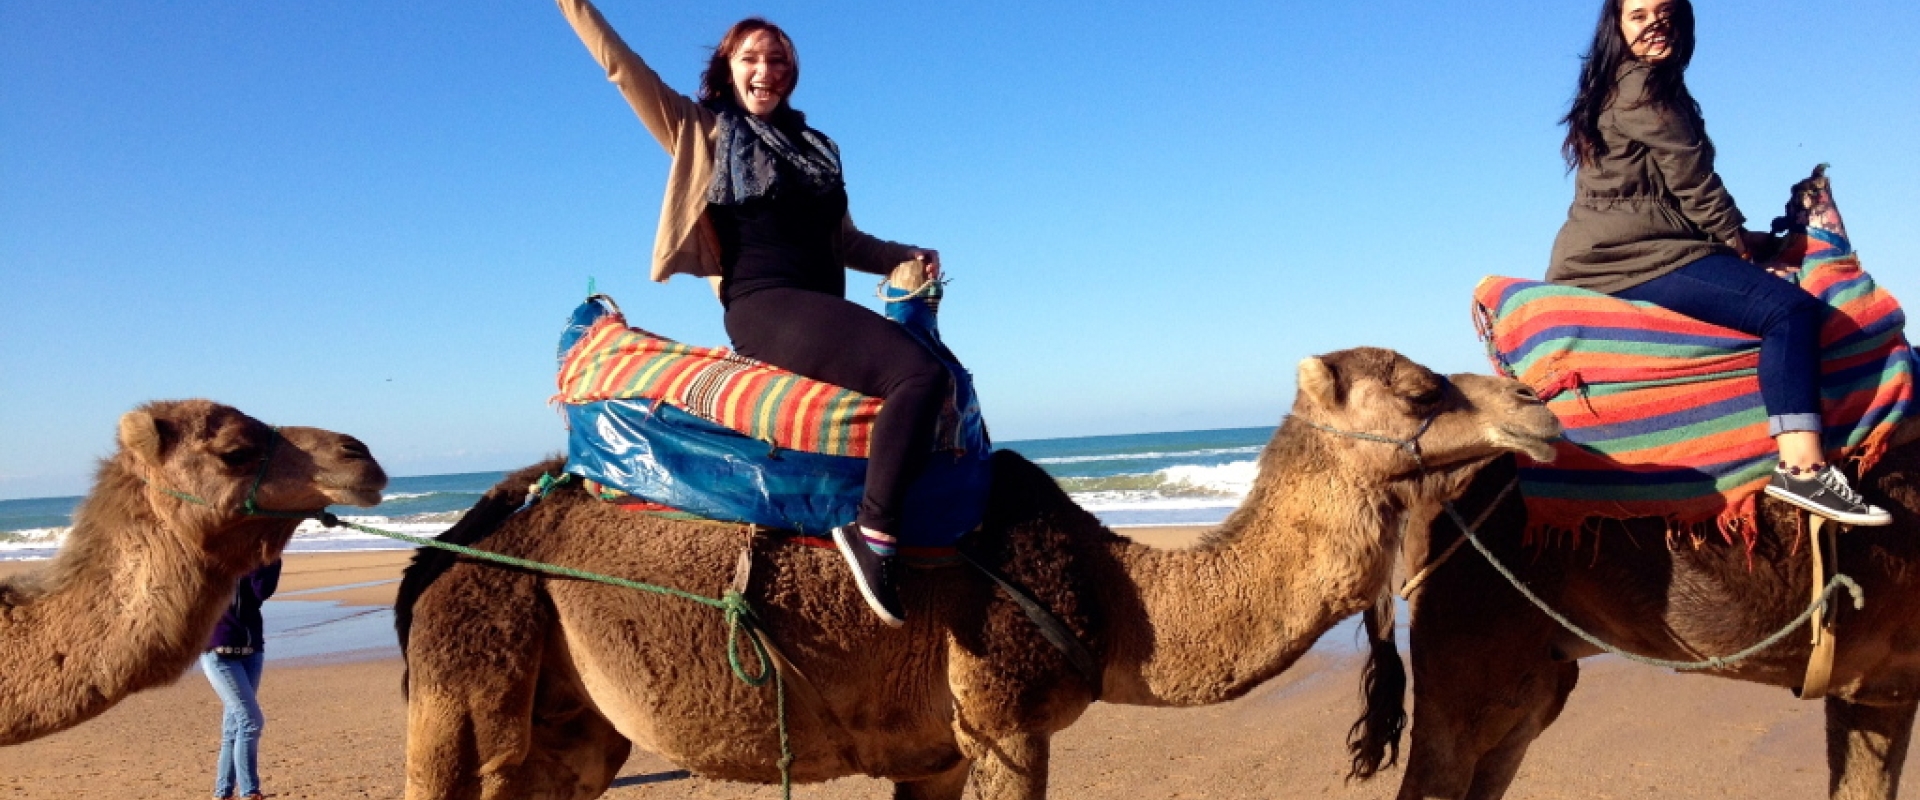 Two students on camels